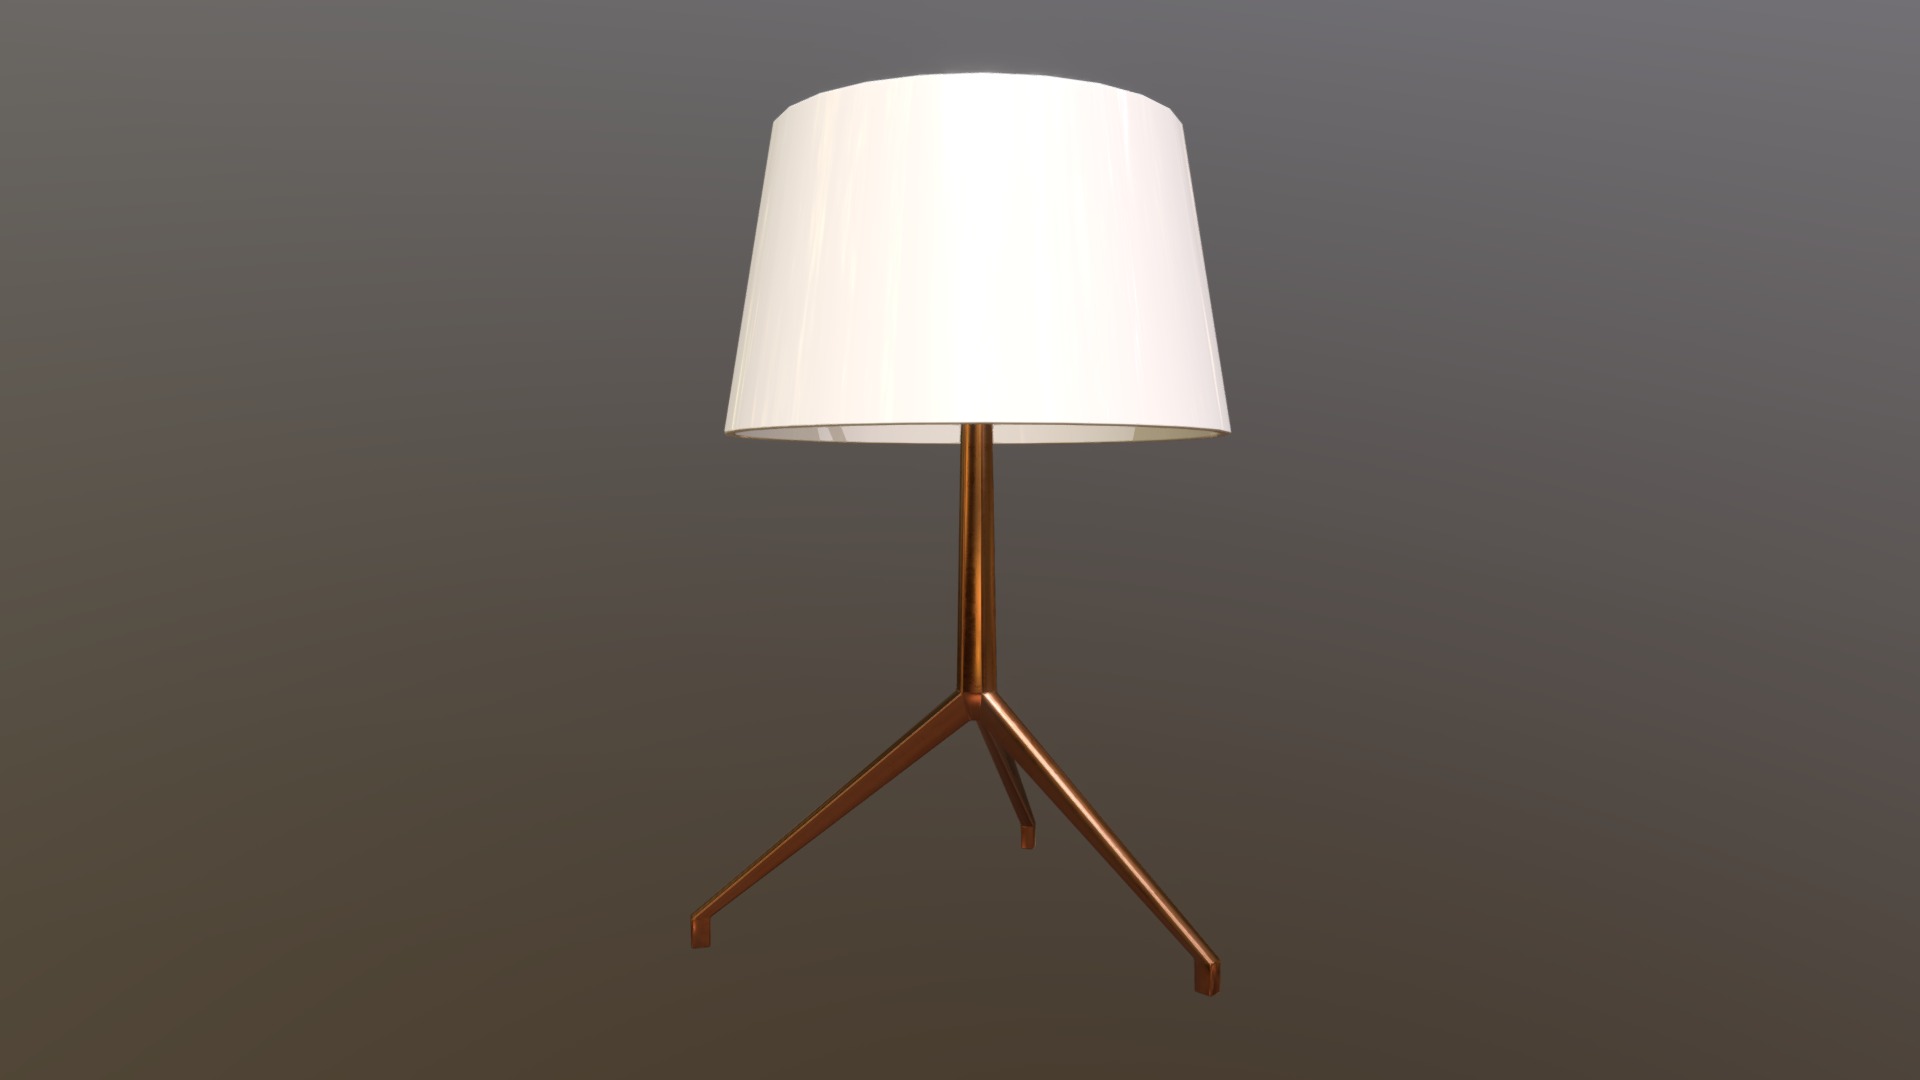 3D model Lamp 03 - This is a 3D model of the Lamp 03. The 3D model is about a lamp on a stand.